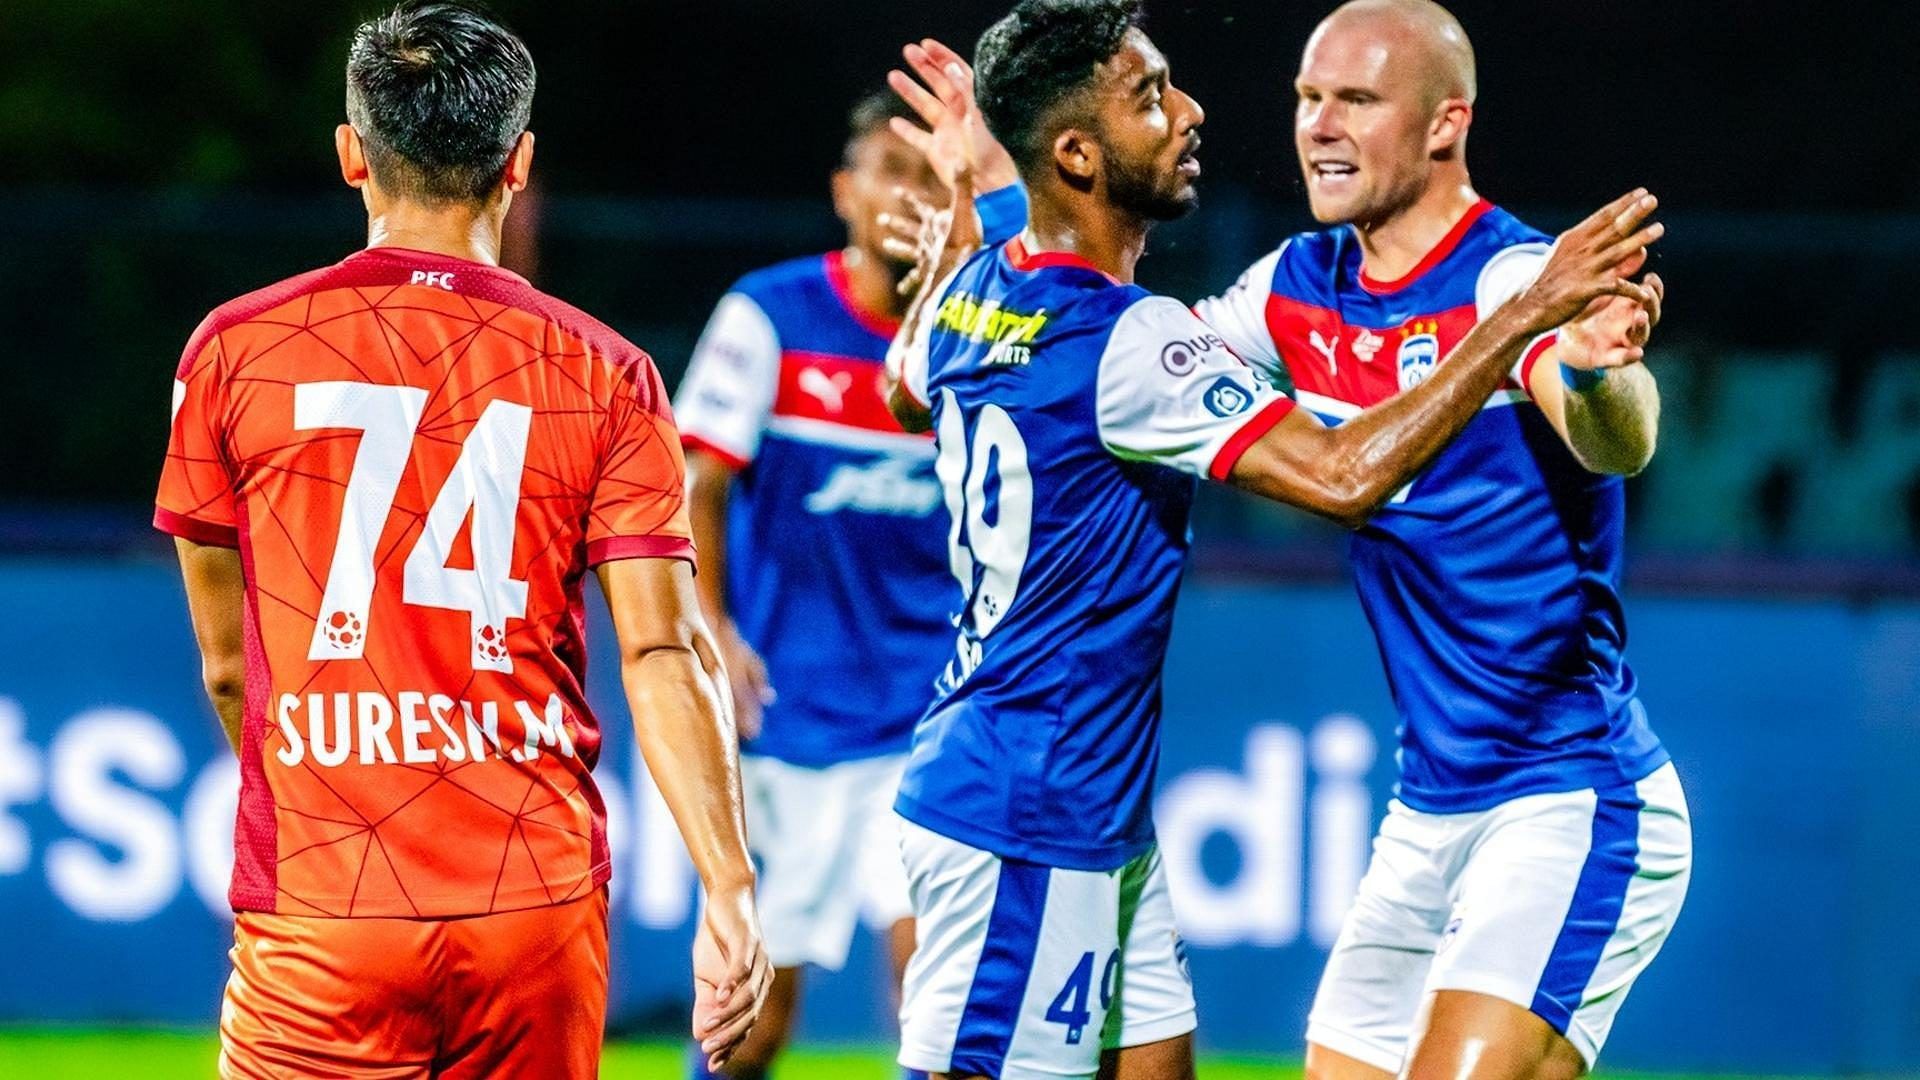 Bengaluru FC recovered from a two-goal deficit to secure a draw.